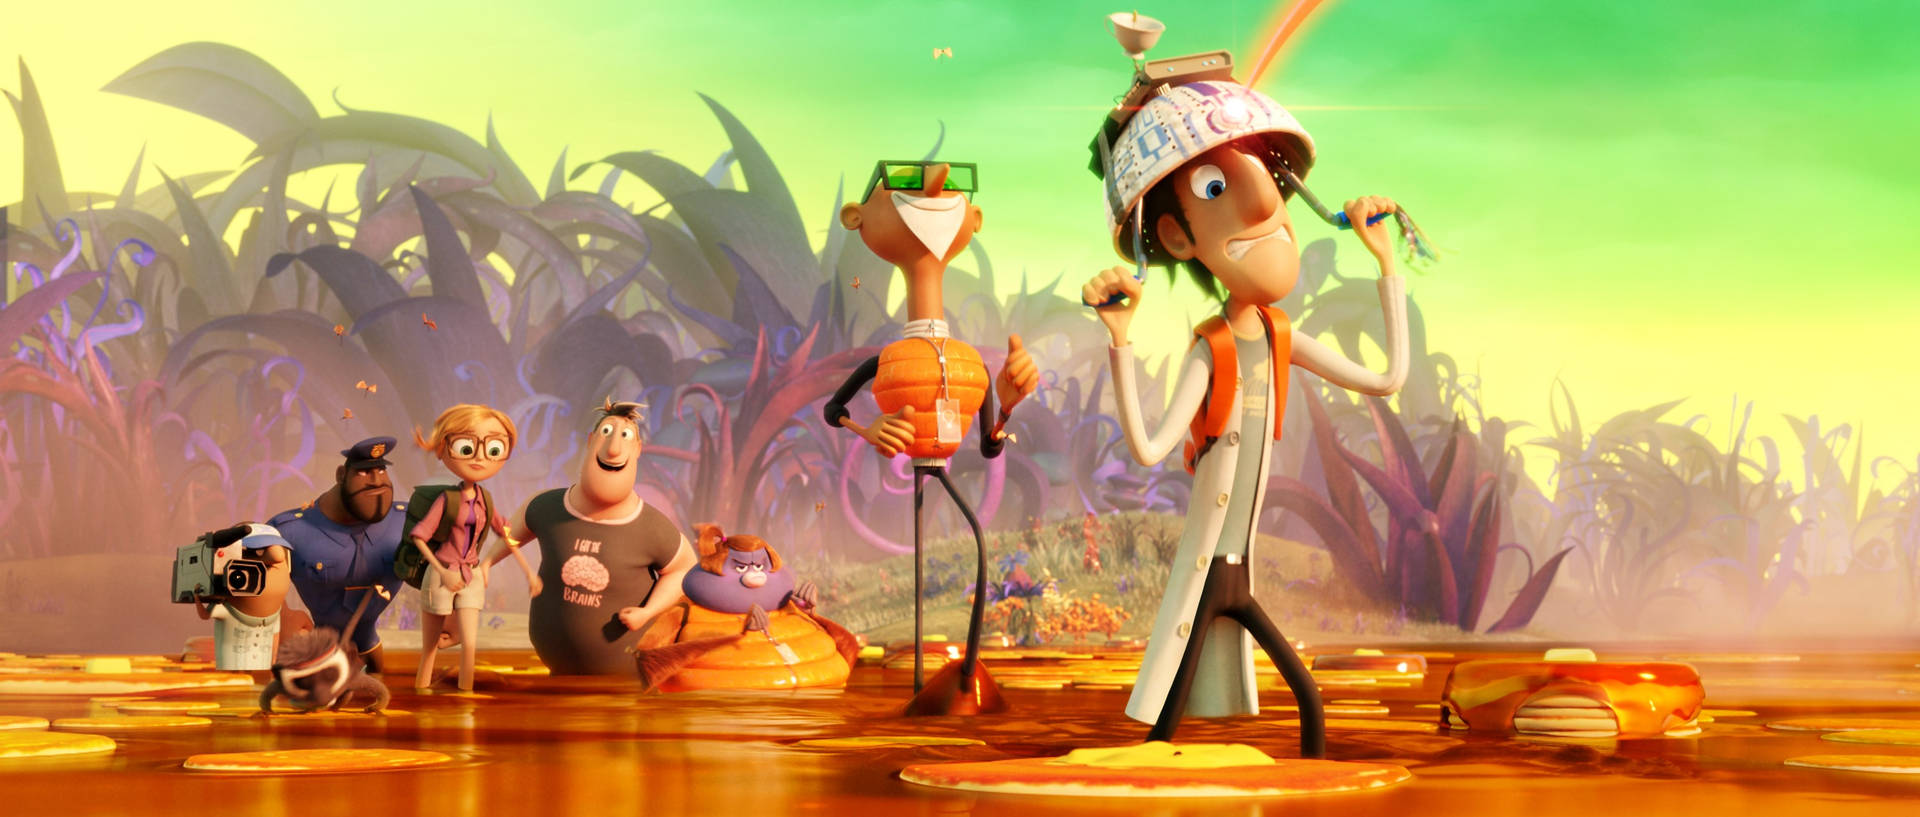 Breakfast Bog From Cloudy With A Chance Of Meatballs 2 Wallpaper